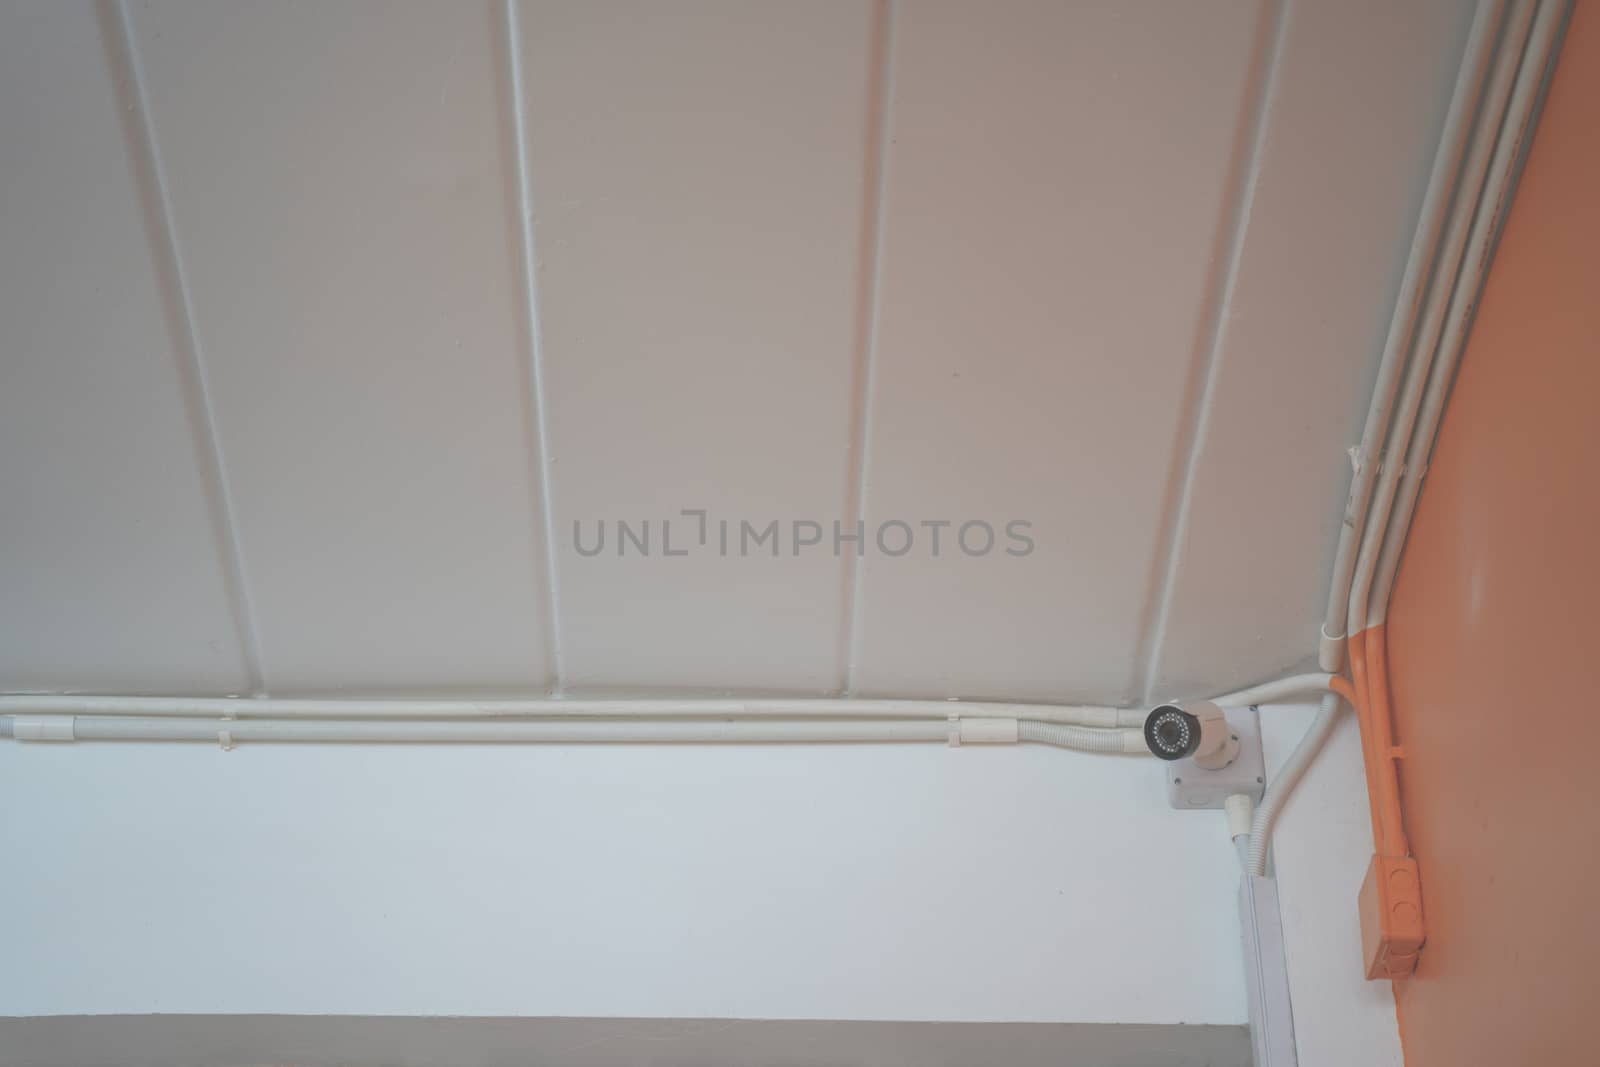 CCTV security camera installed on ceiling building by peerapixs